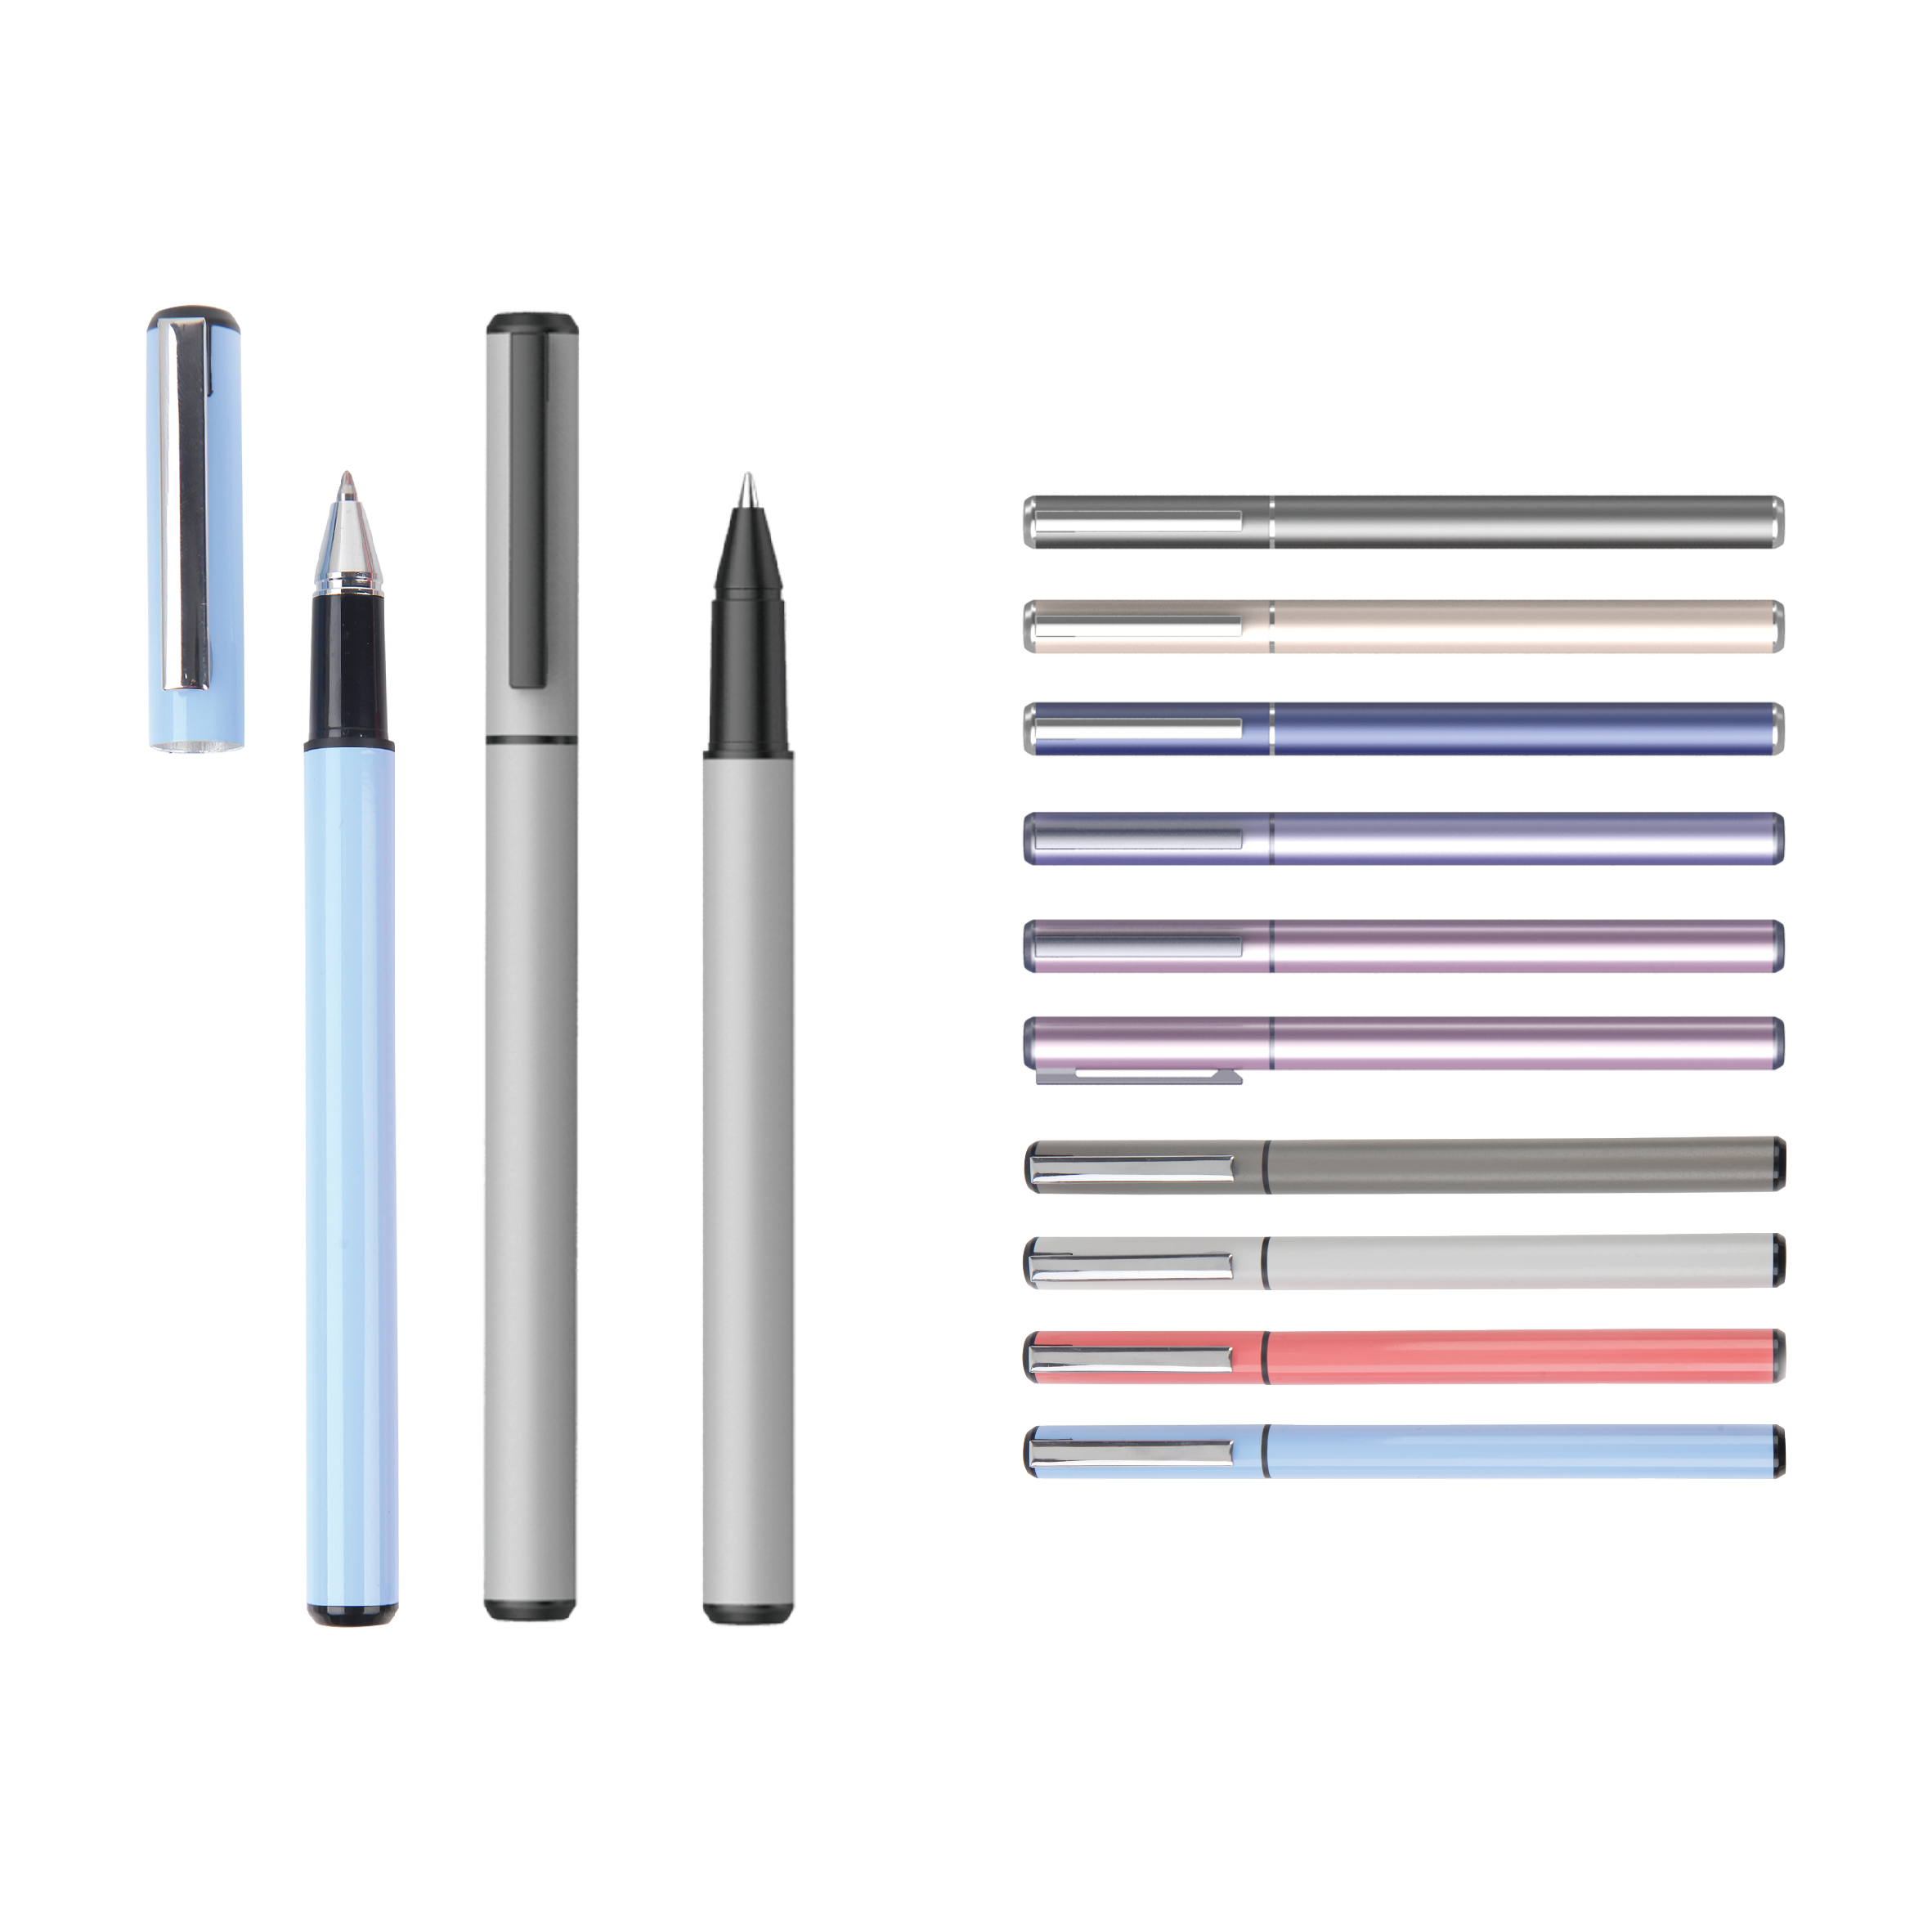 0.7mm&0.5mm Cap Off Metal Gel Pen For Student Perfect Gift